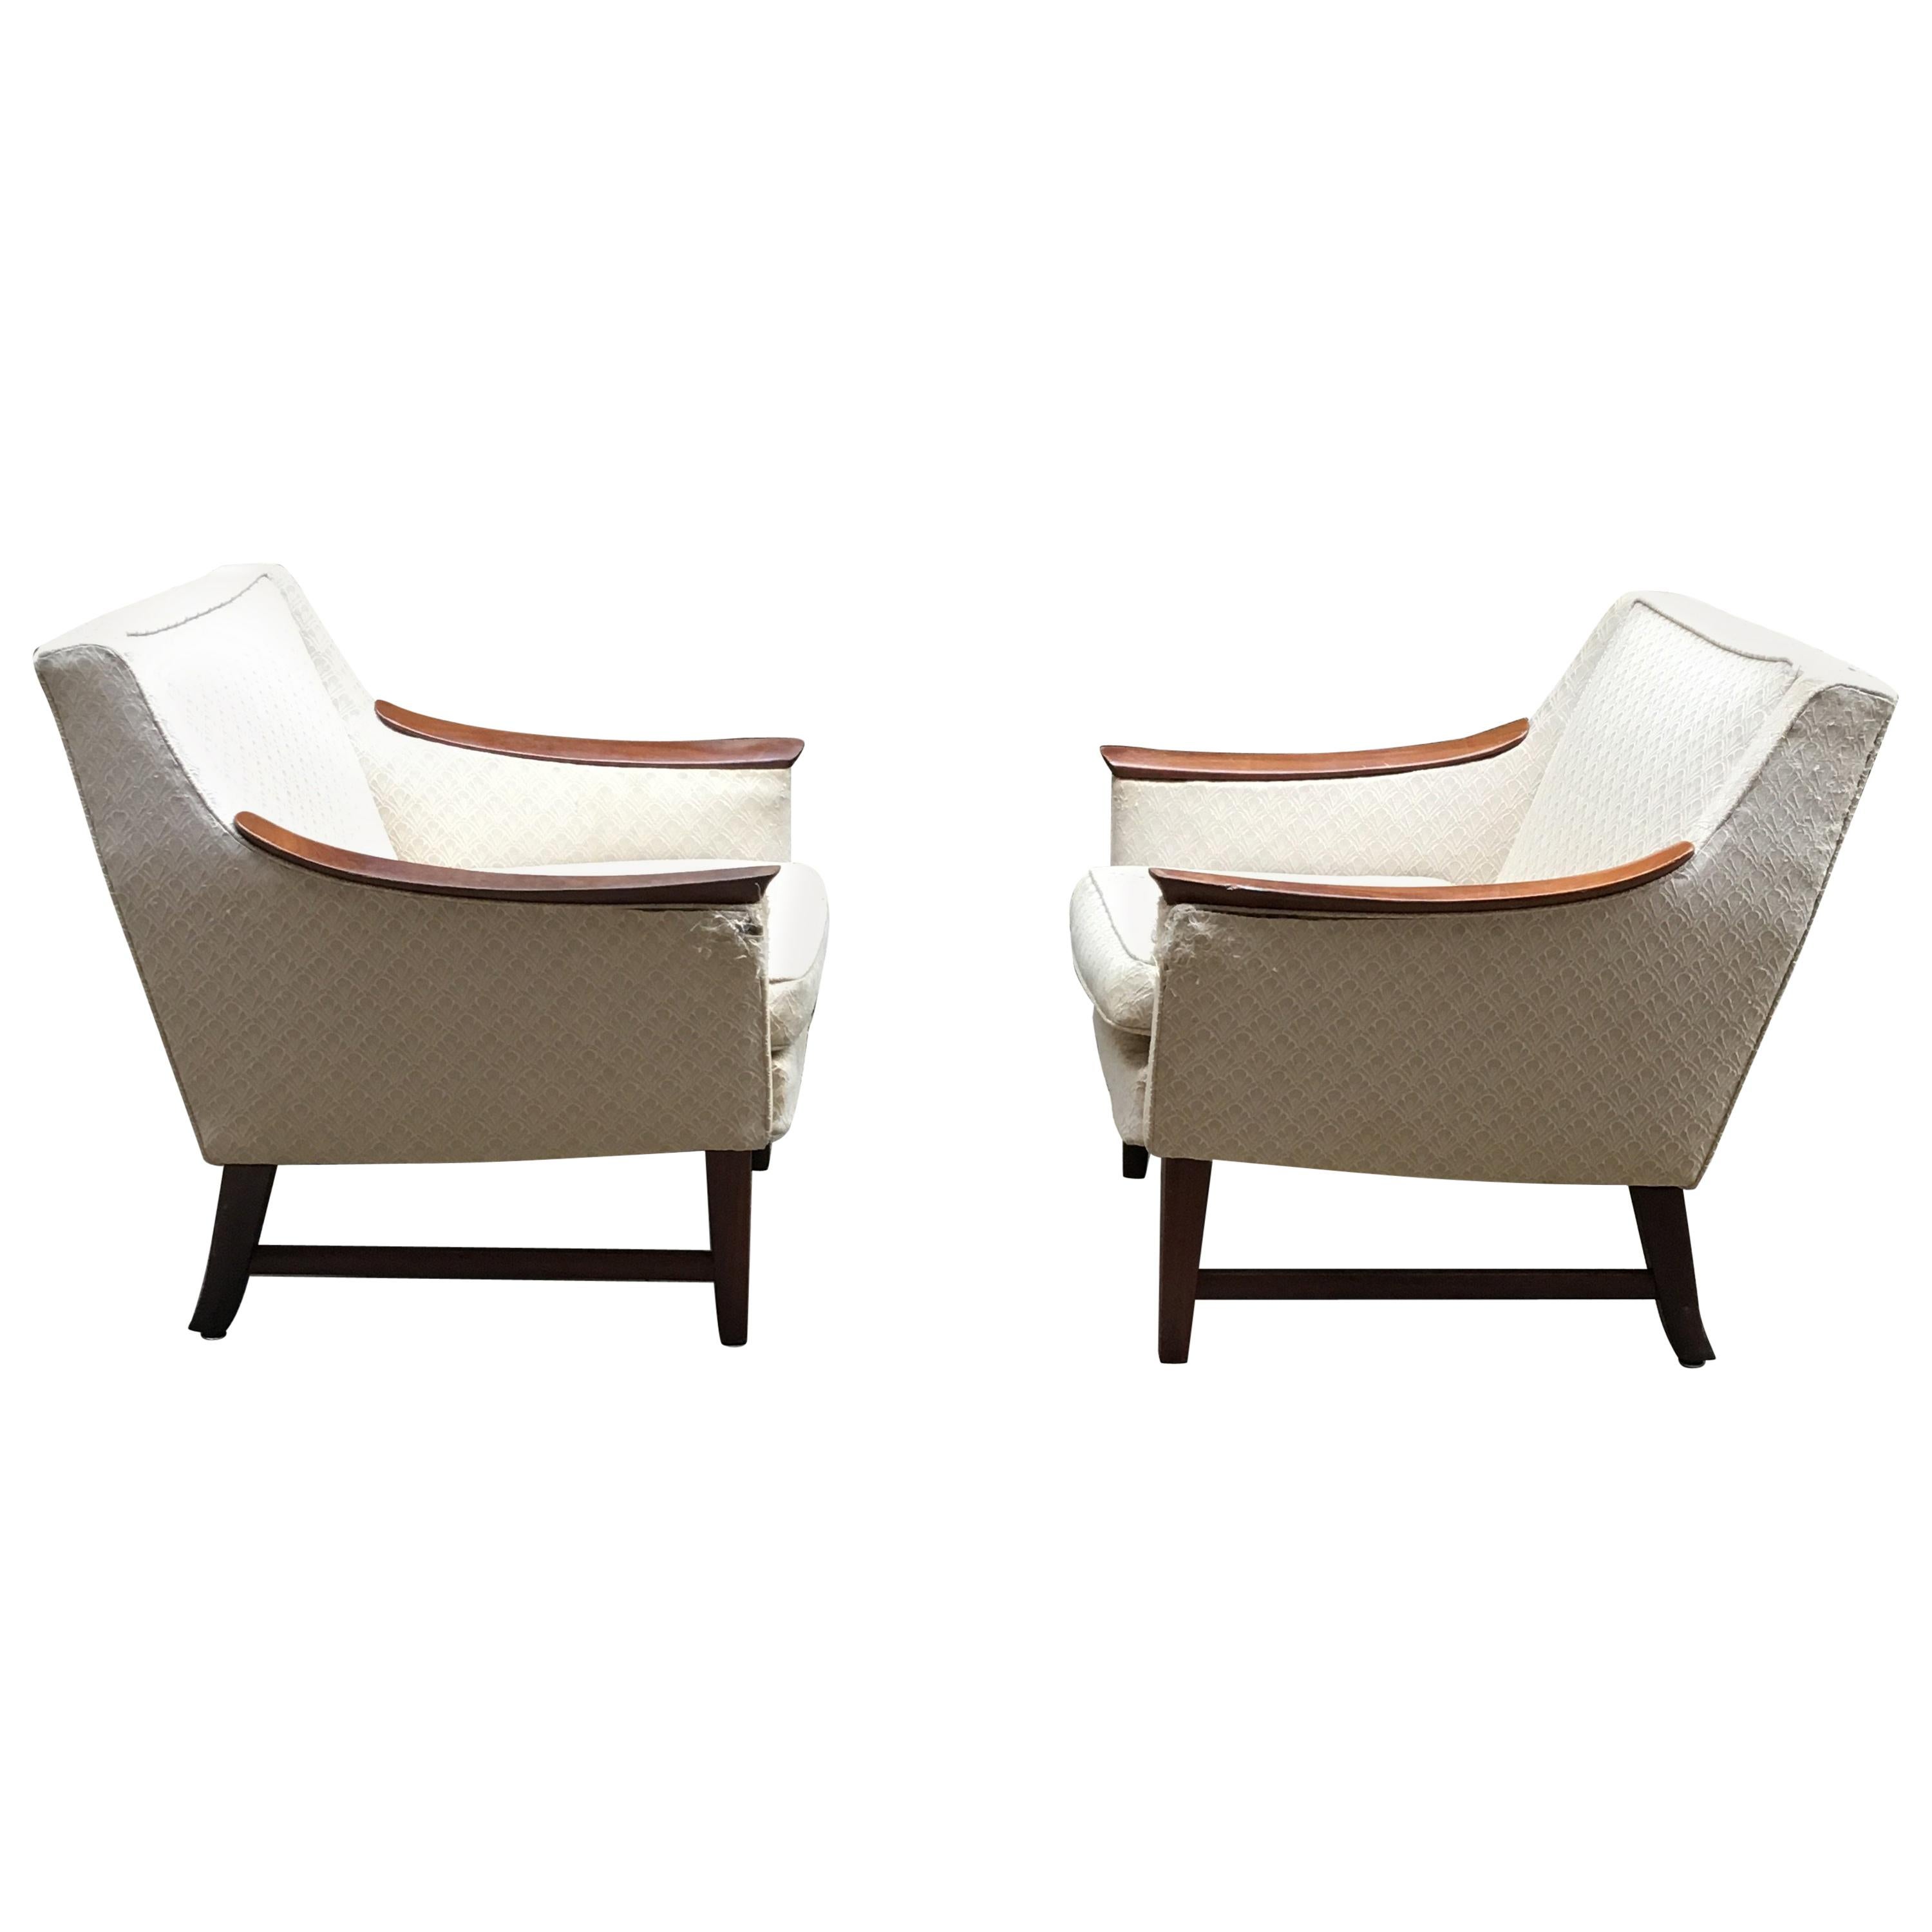 Pair of Scandinavian Armchairs in the Manner of Rastad and Relling